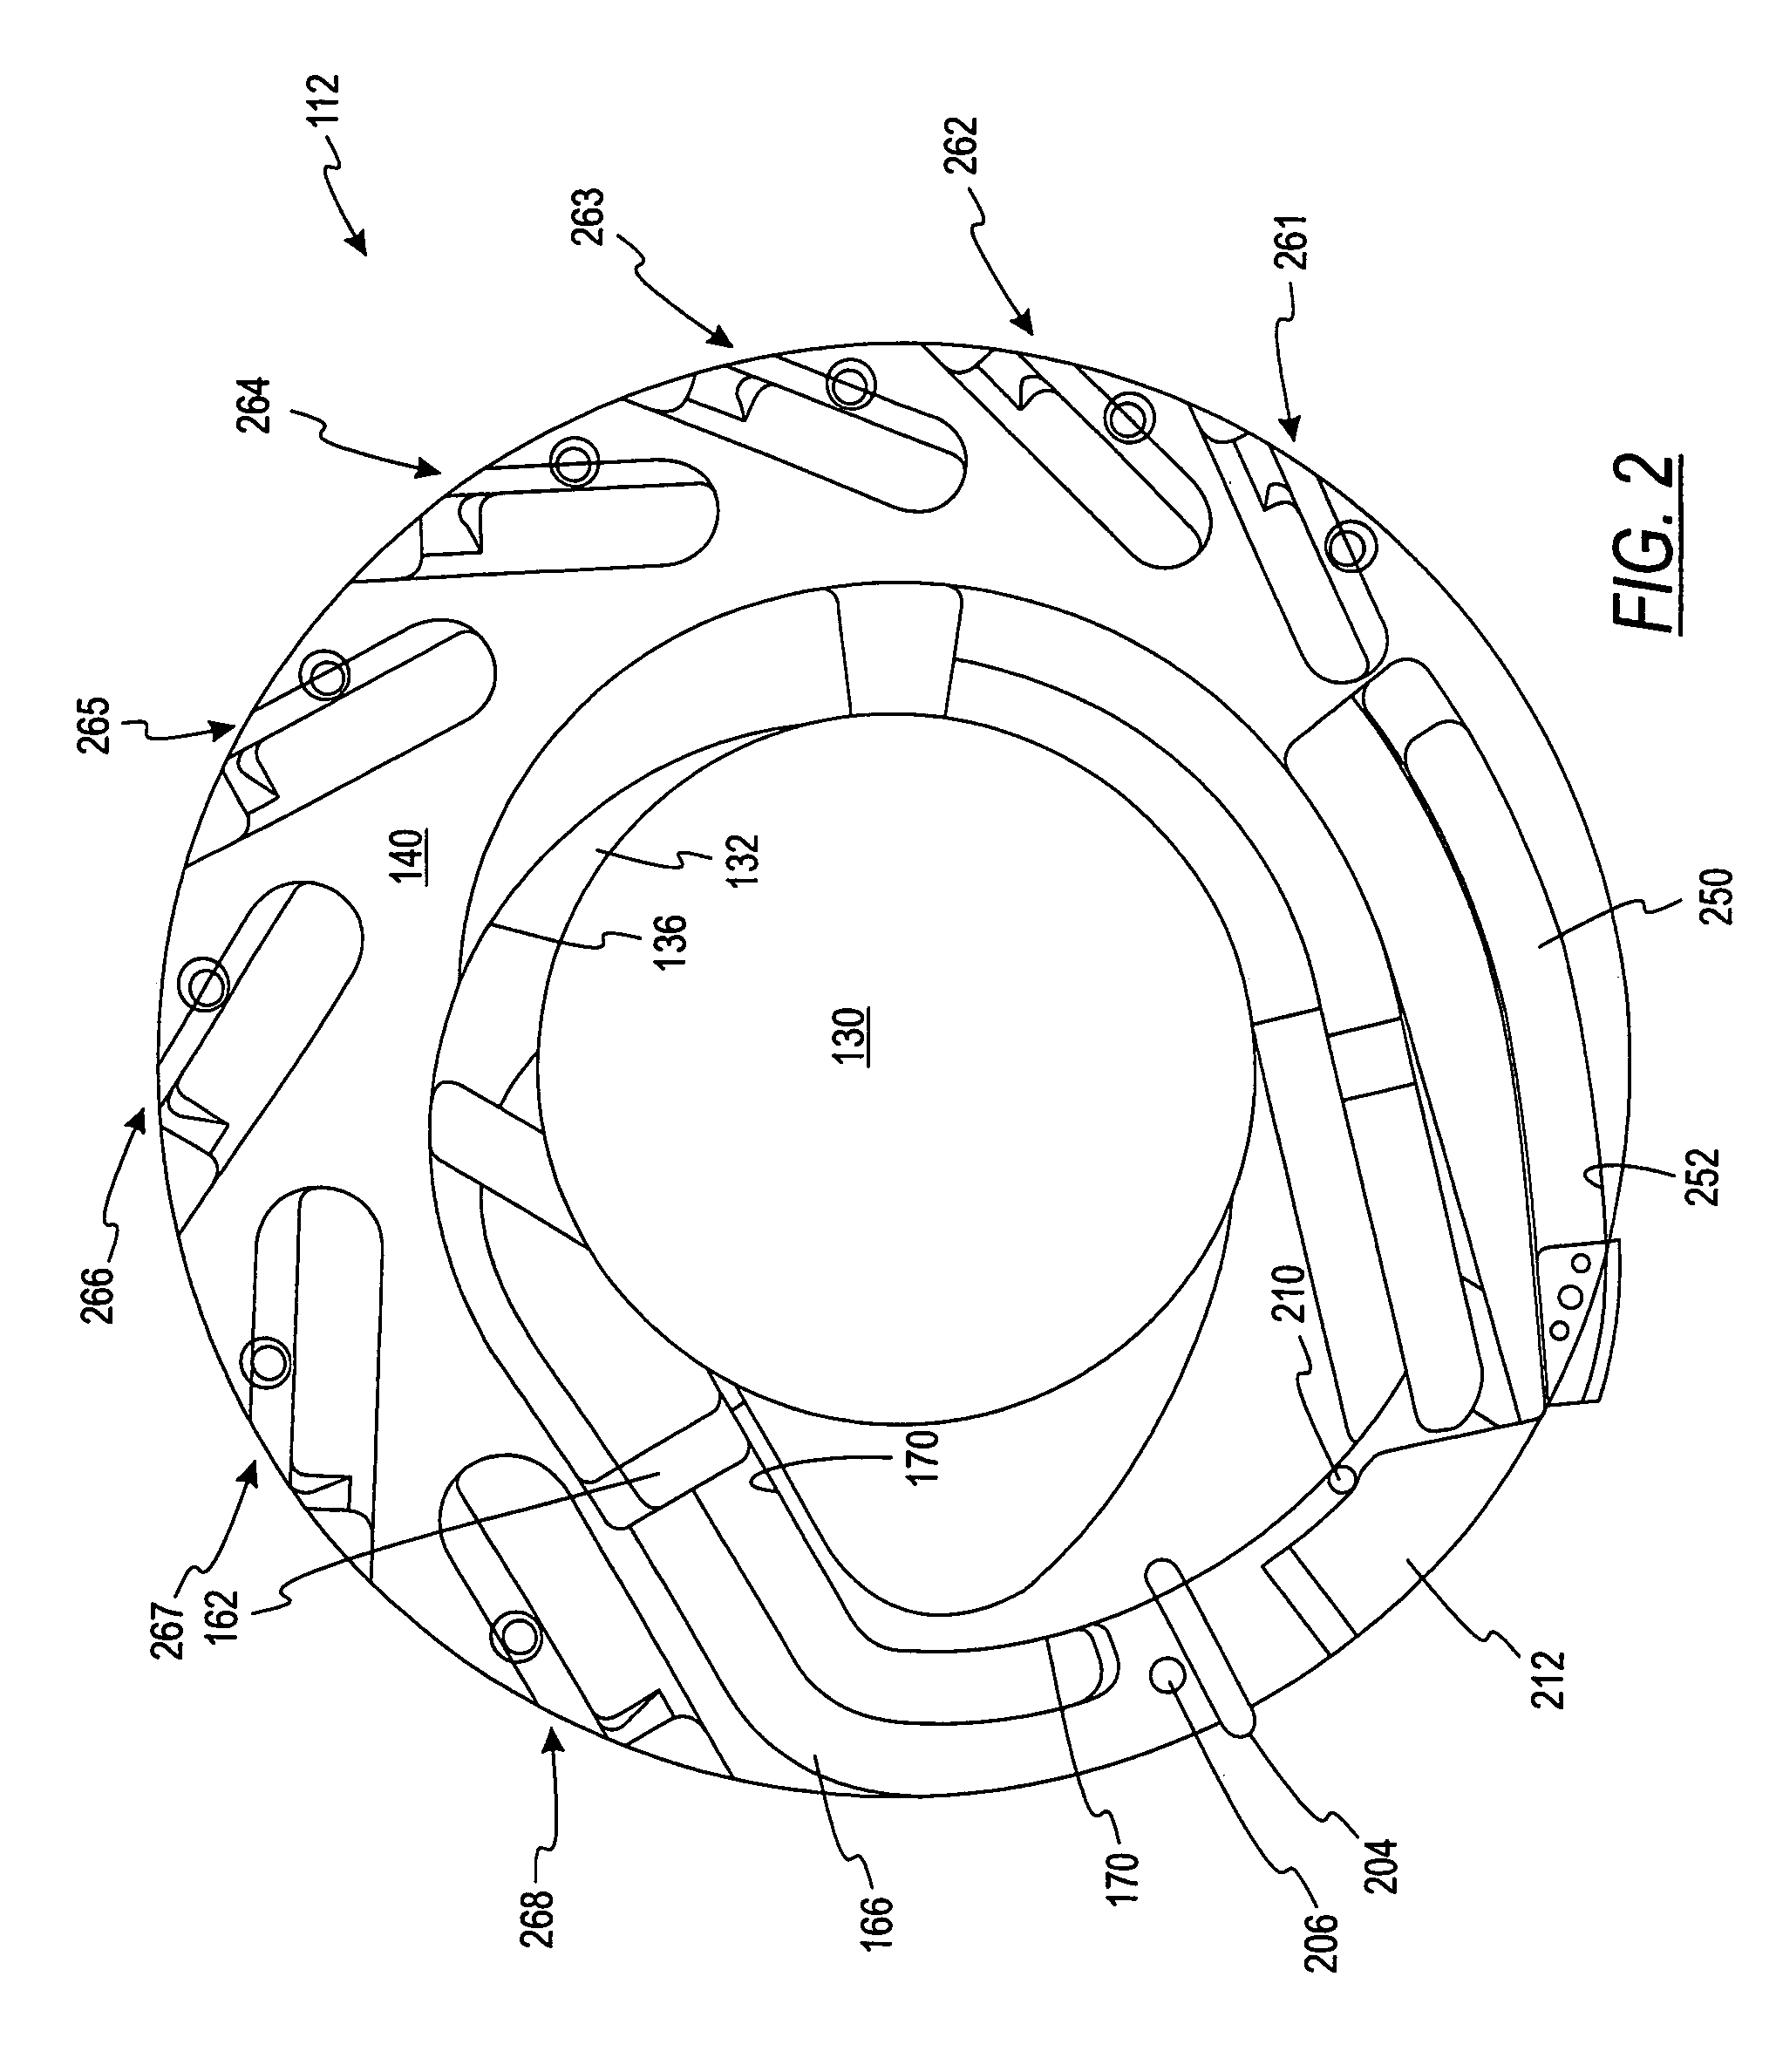 Coin processing device having a moveable coin receptacle station